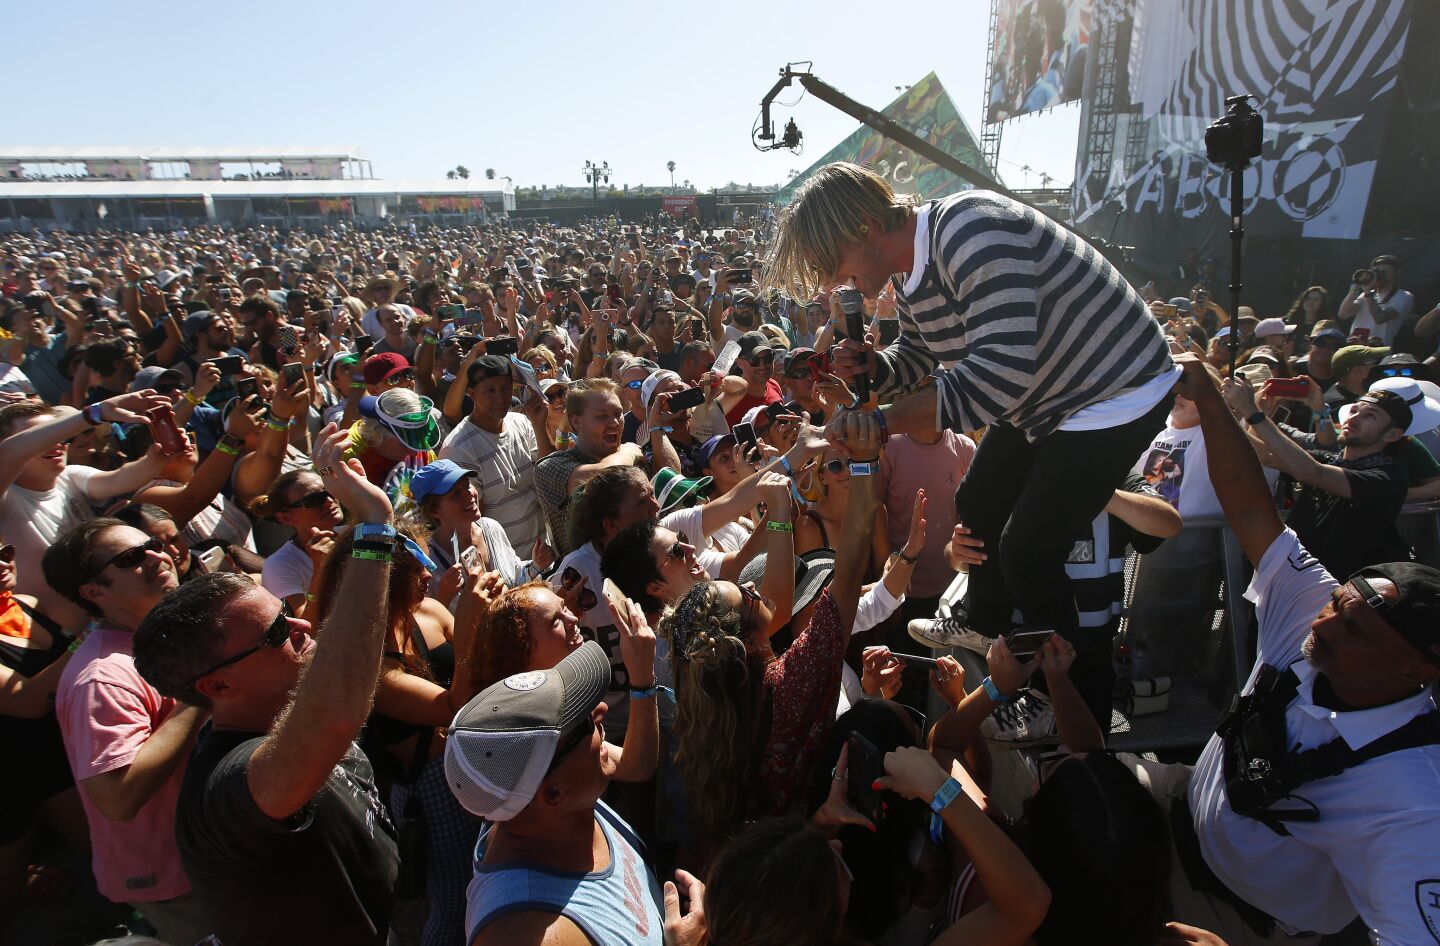 Jon Foreman of the band Switchfoot goes into the crowd at the Sunset Cliffs stage at KAABOO Del Mar on Saturday, Sept. 14, 2019.